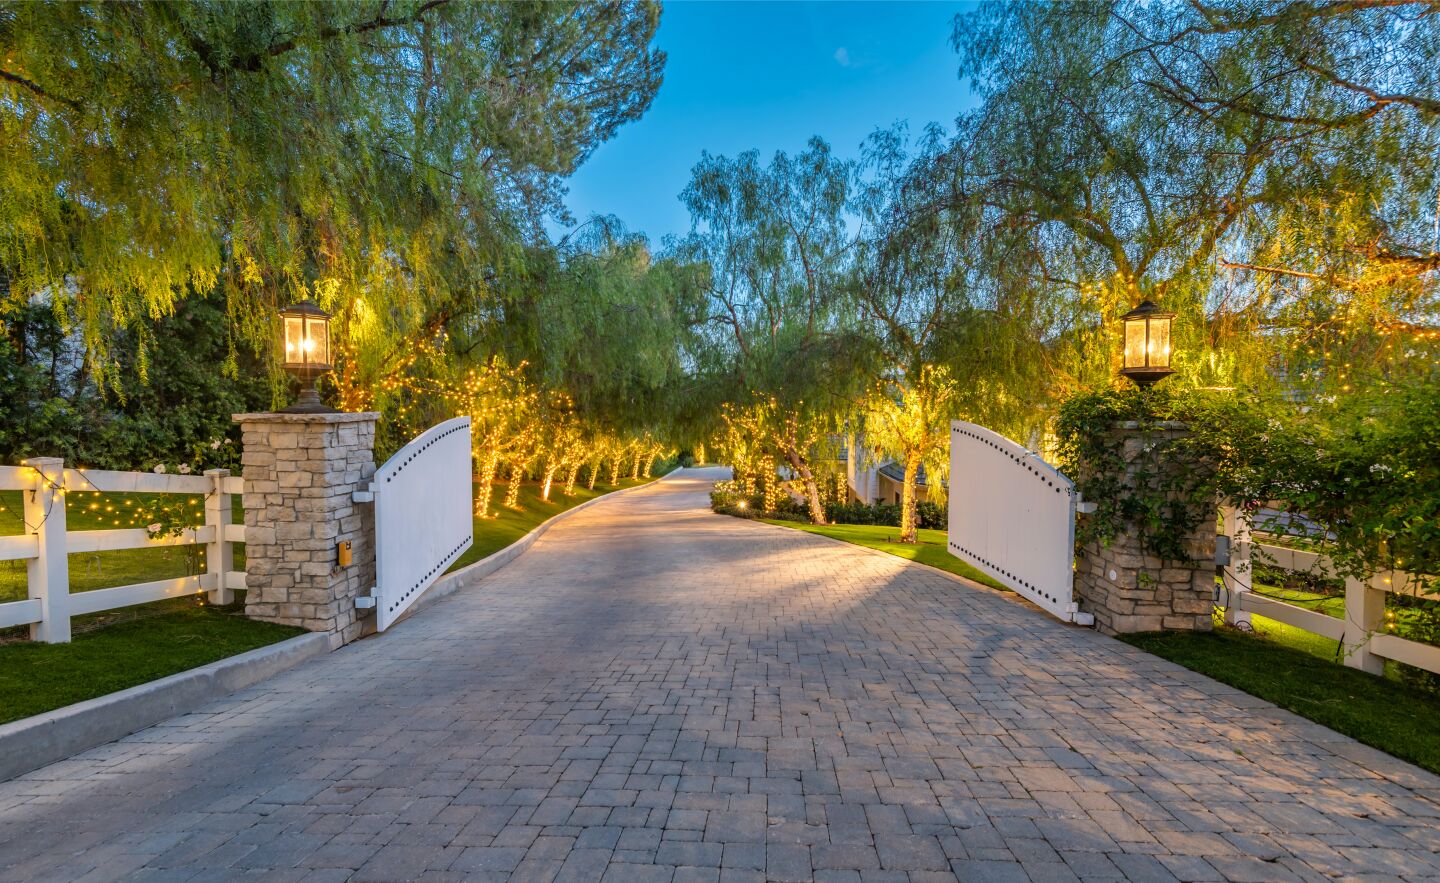 The driveway.